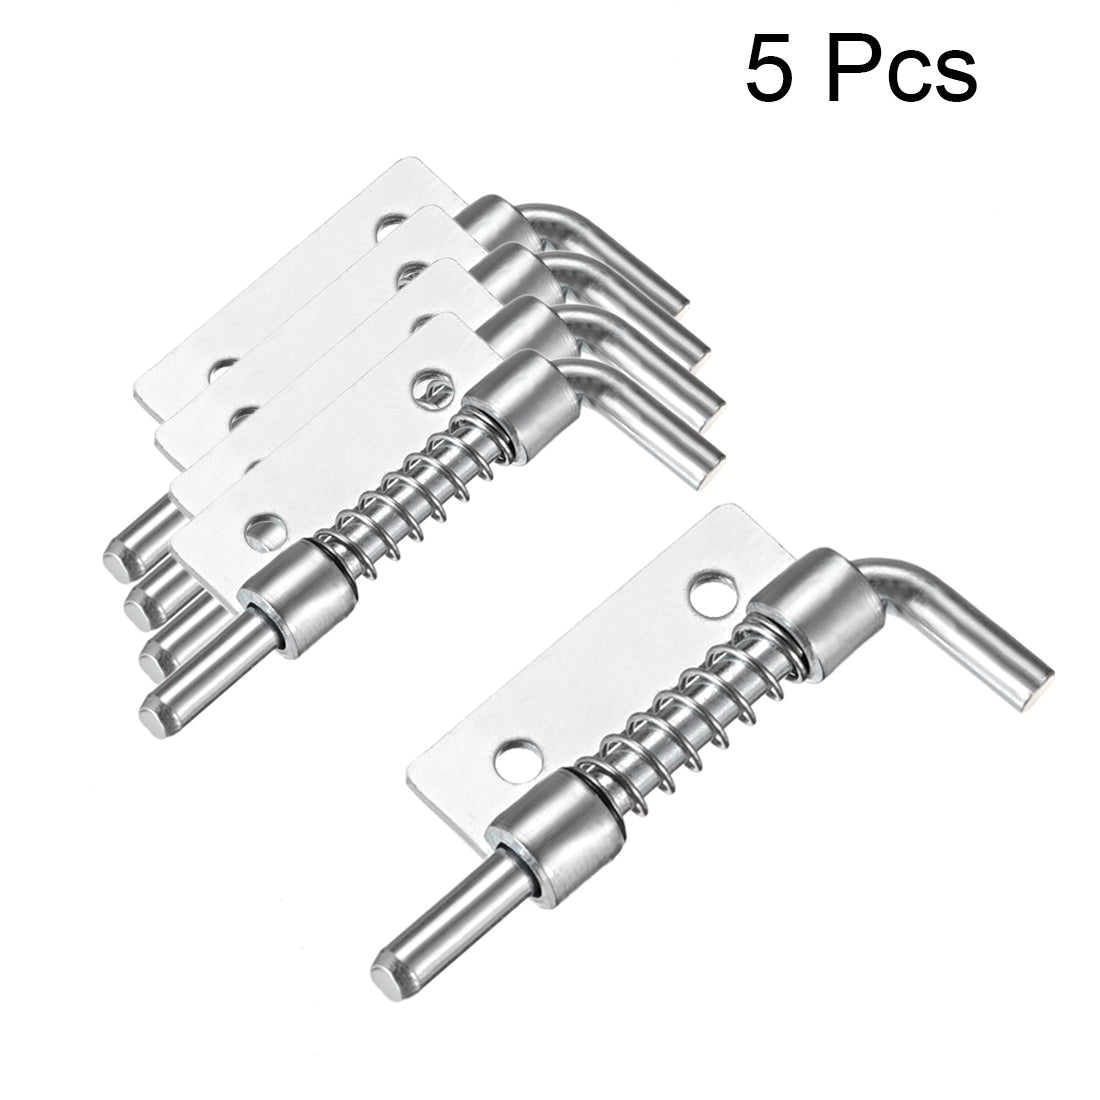 Uxcell Uxcell 5pcs Carbon Steel Lock Bolt Spring Loaded Pin Latch 93mm Long (Right)